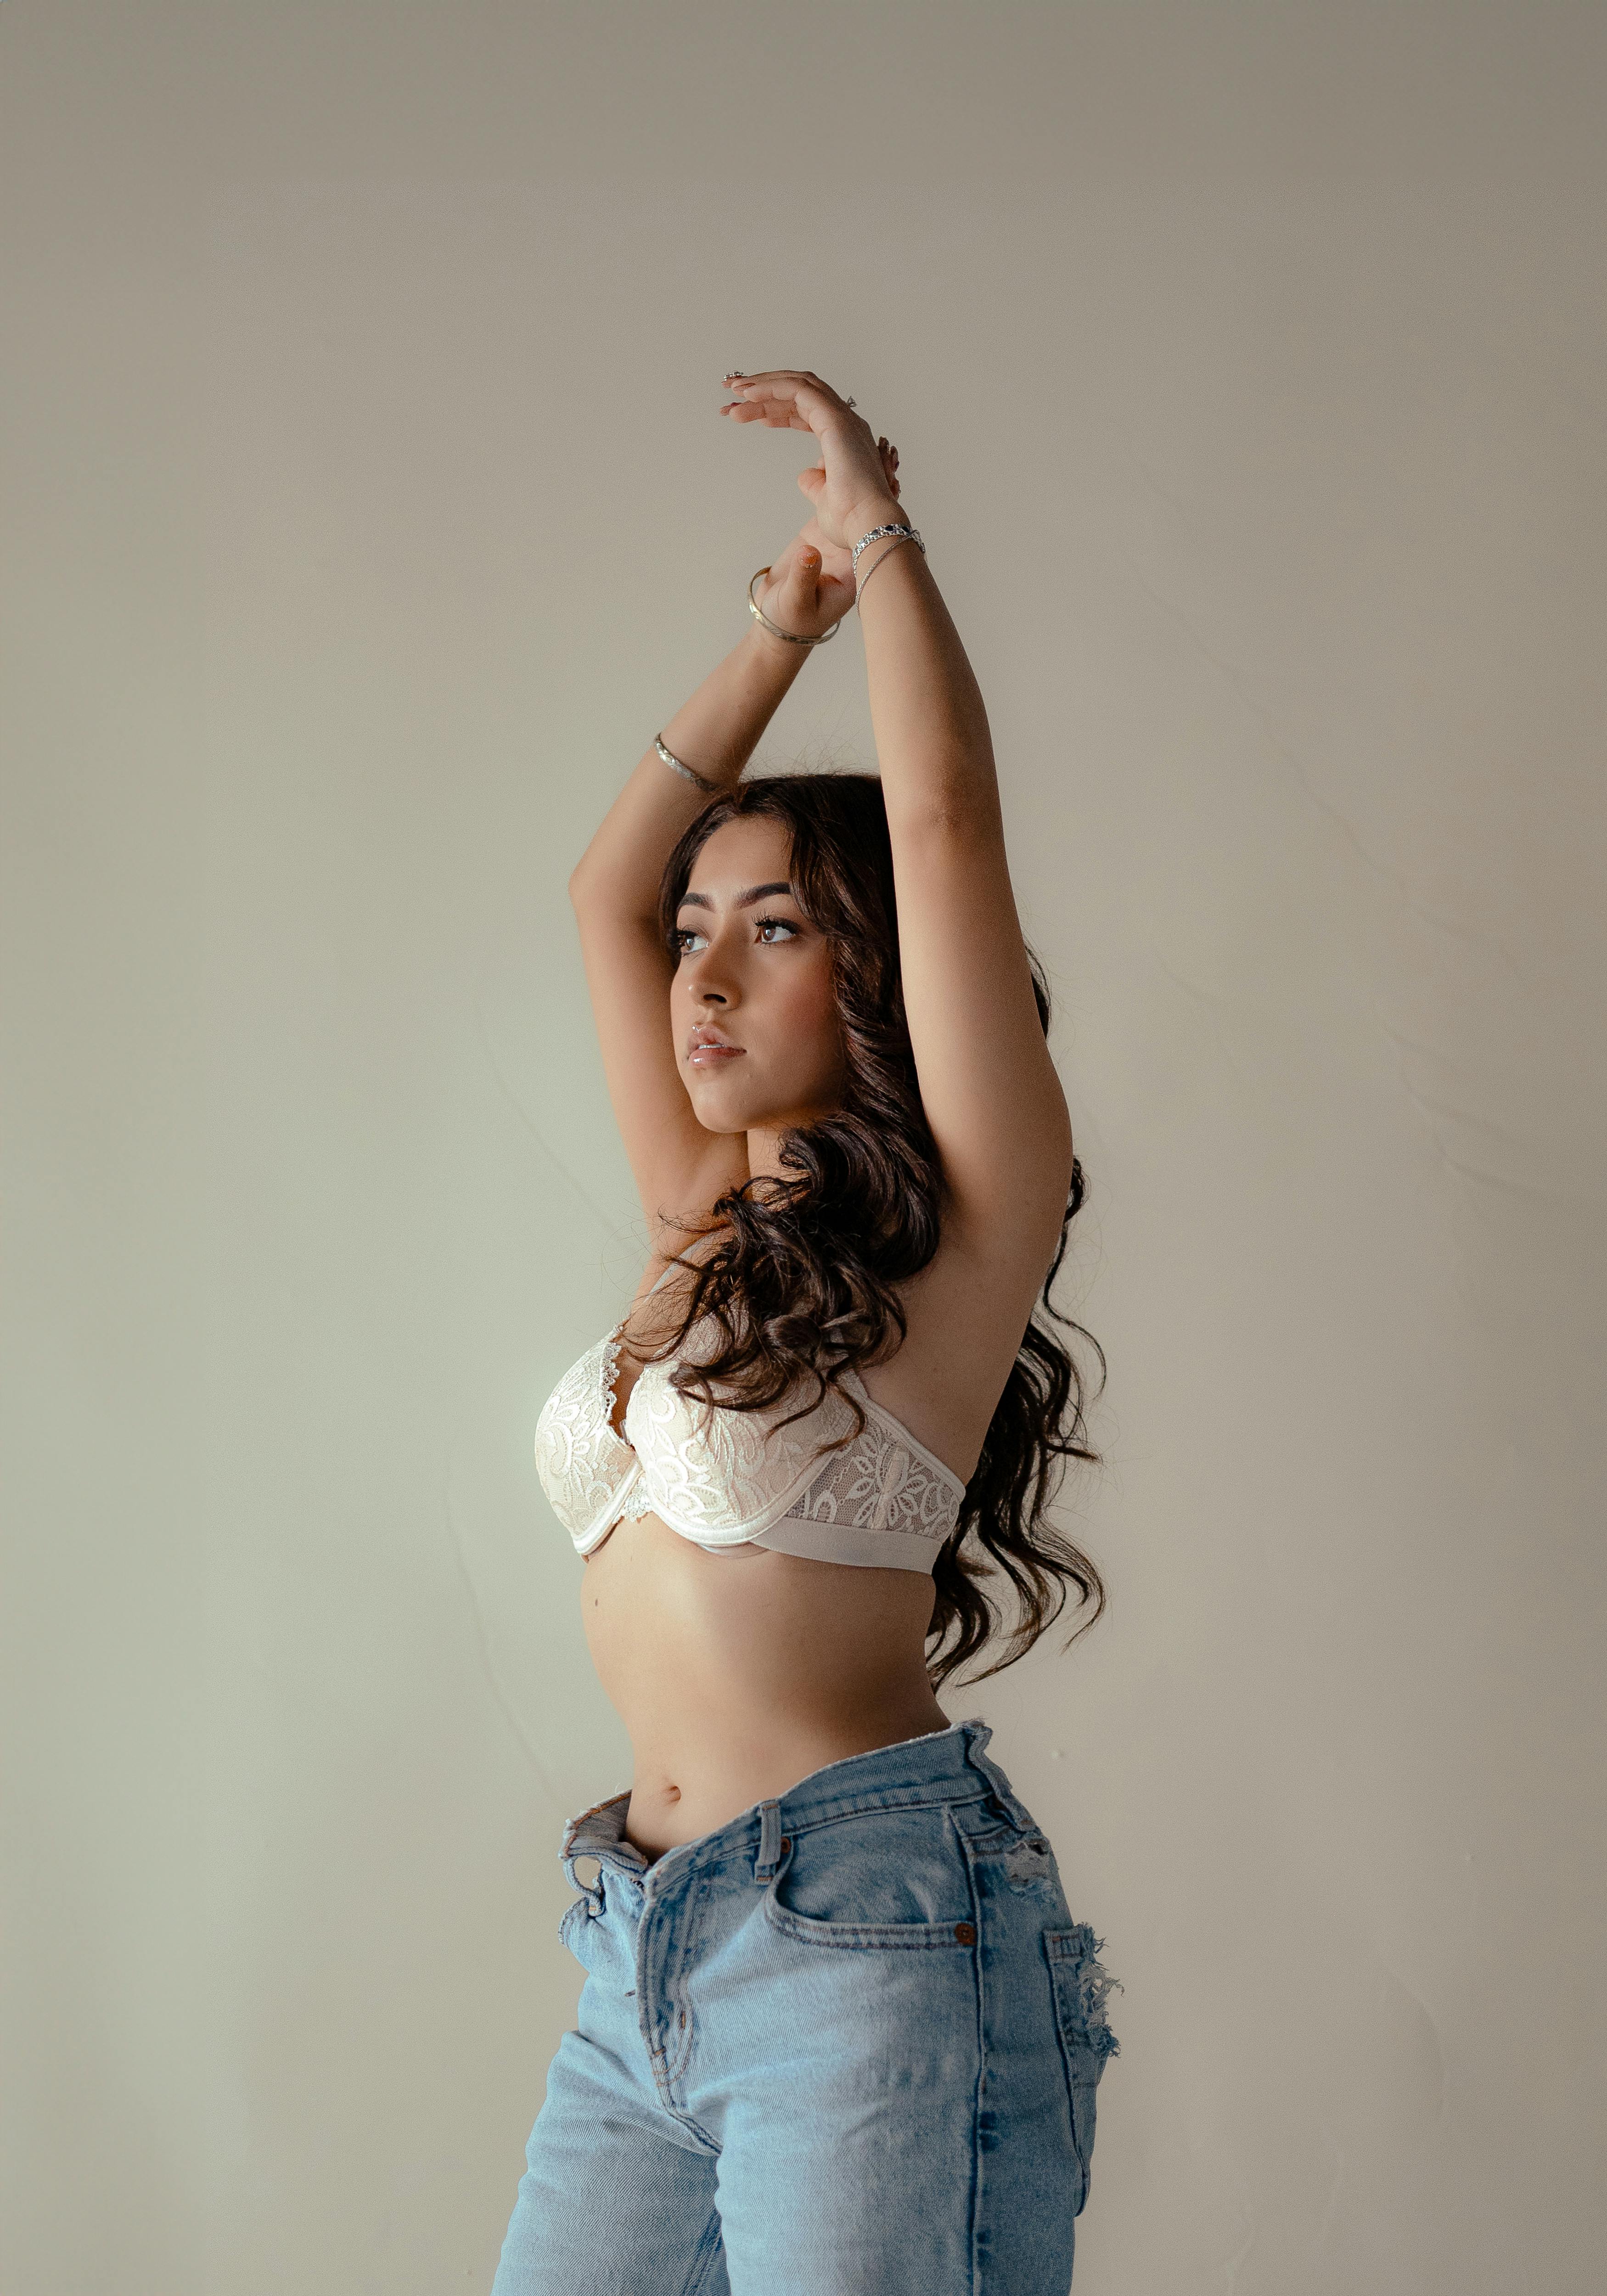 Young Woman in a Bra and Jeans Standing with her Arms Raised